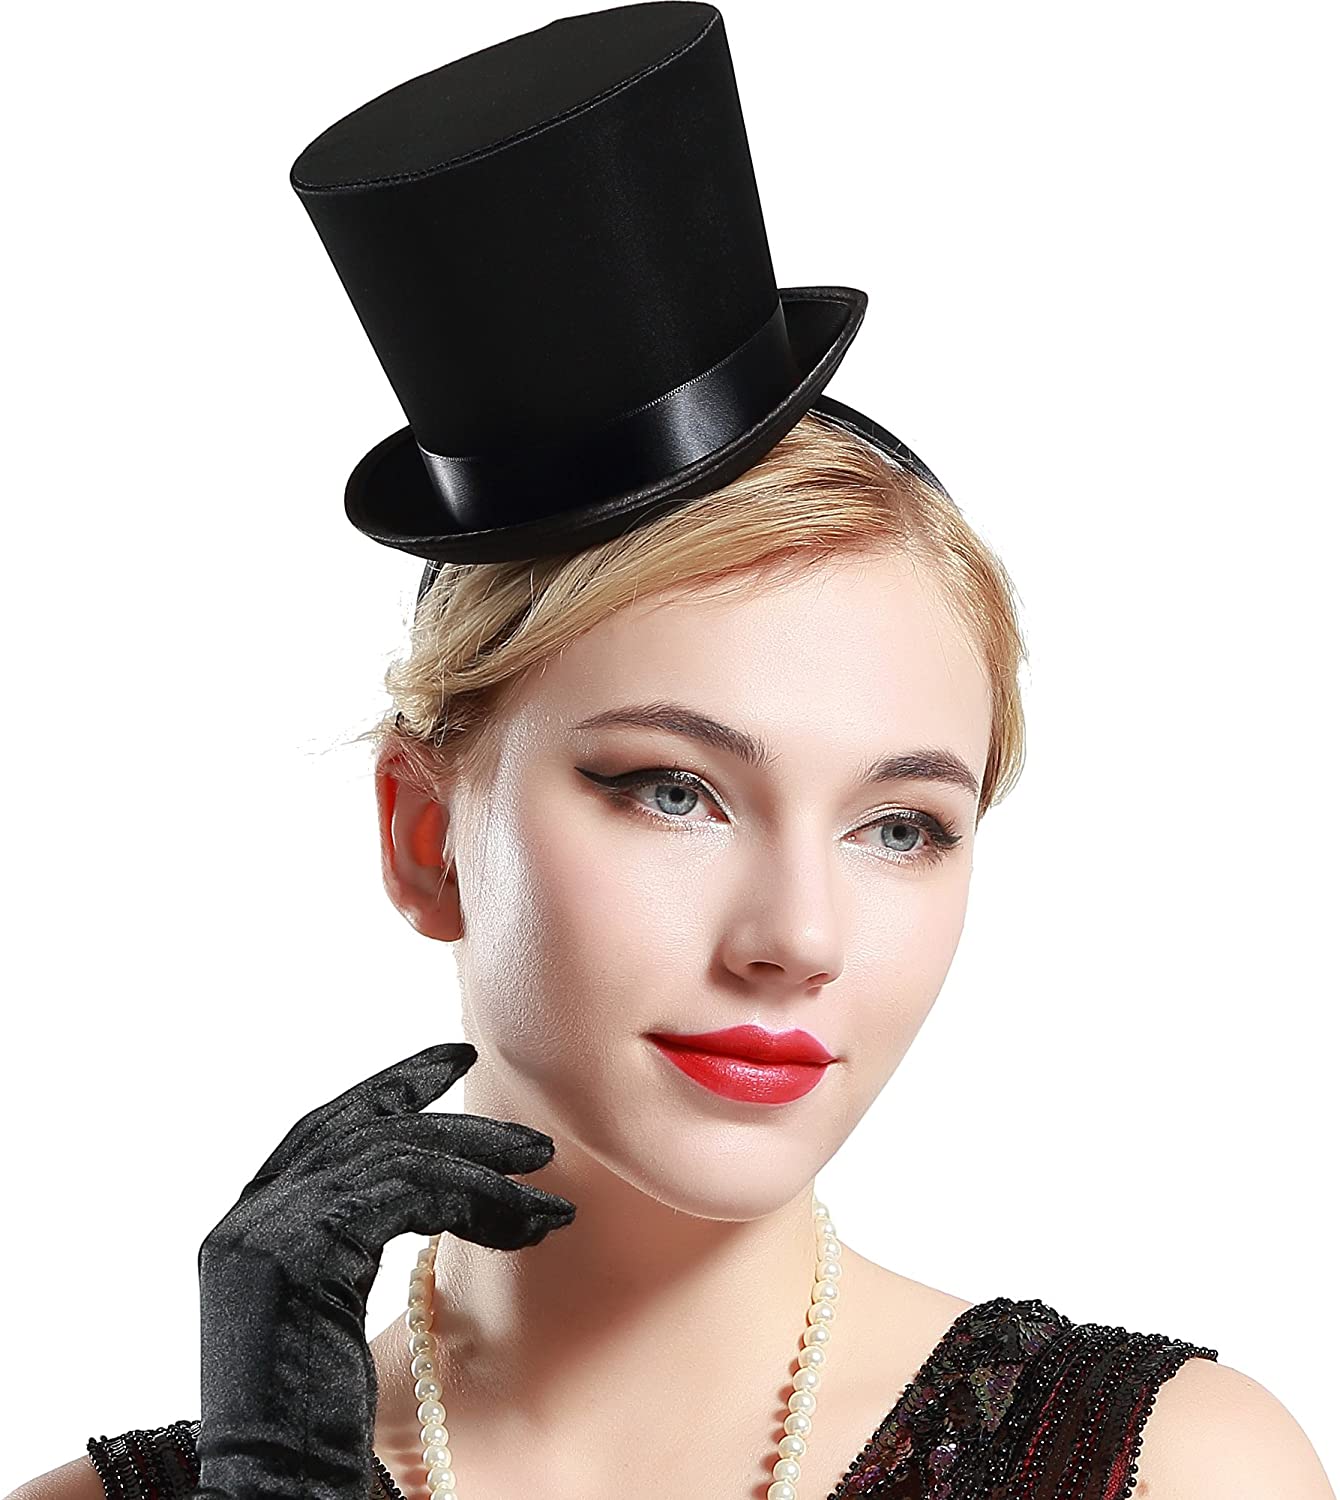 BABEYOND Vintage Black Mini Top Hat Headband Dress Up Costume Party Fancy Accessory with black 